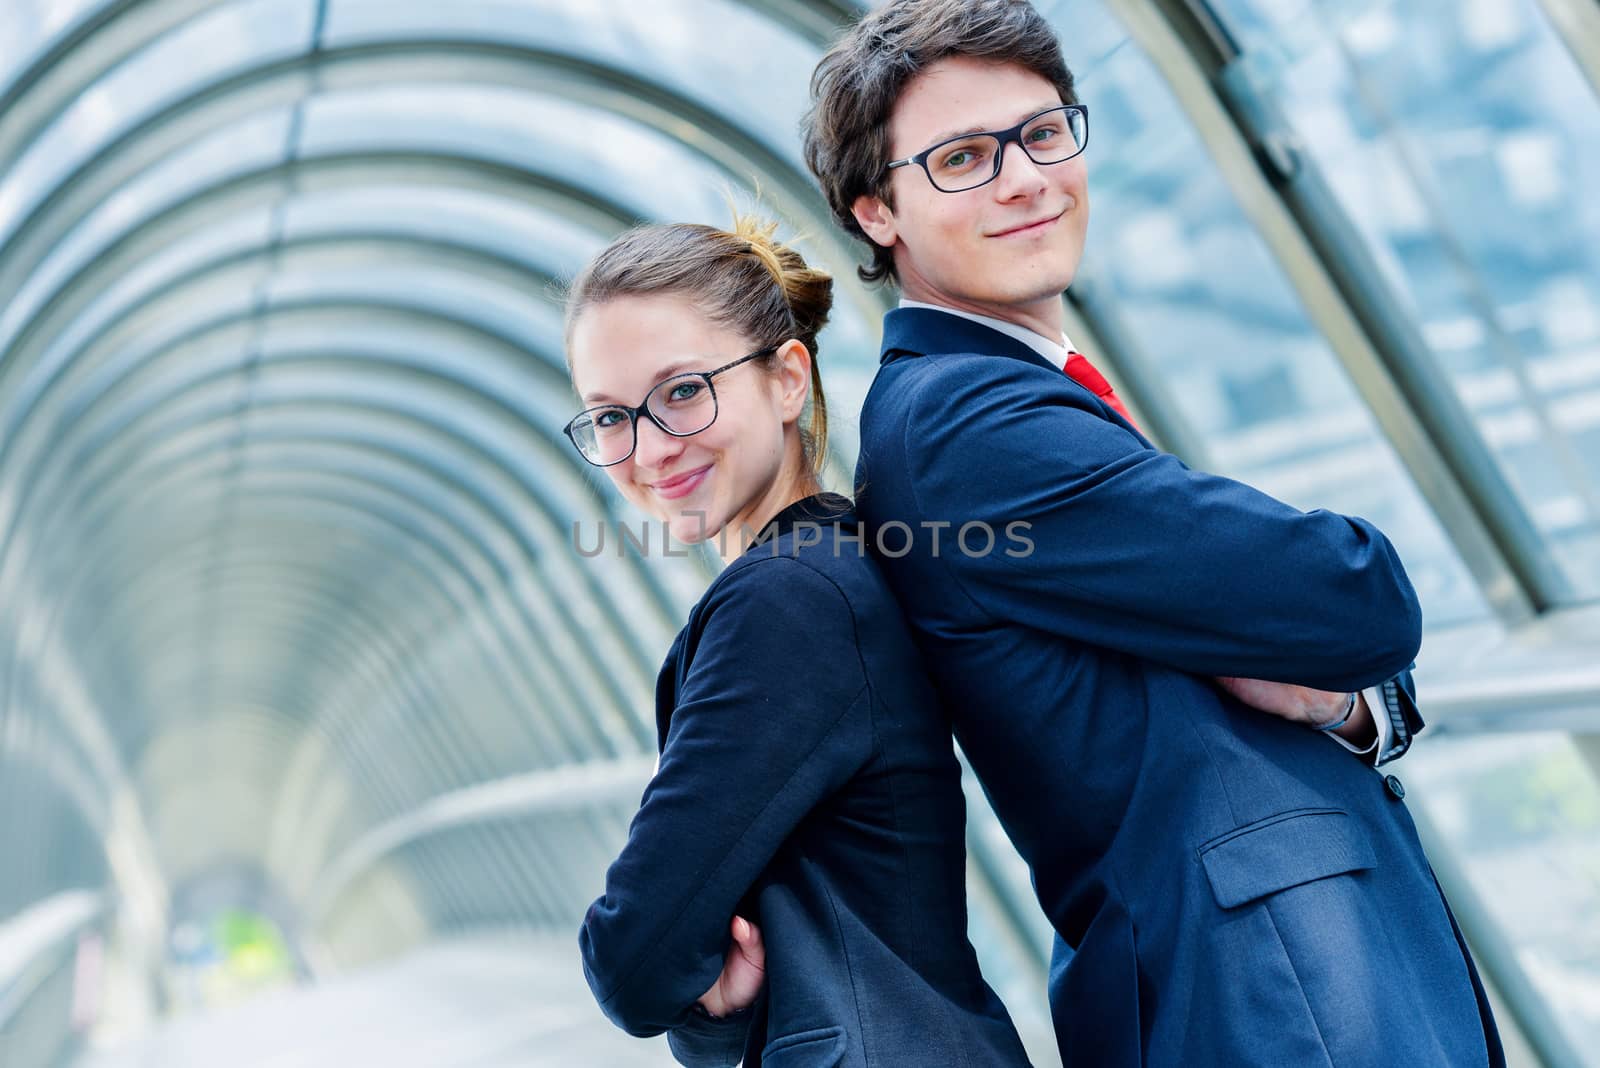 expressive portrait Junior executives of company crossed arms